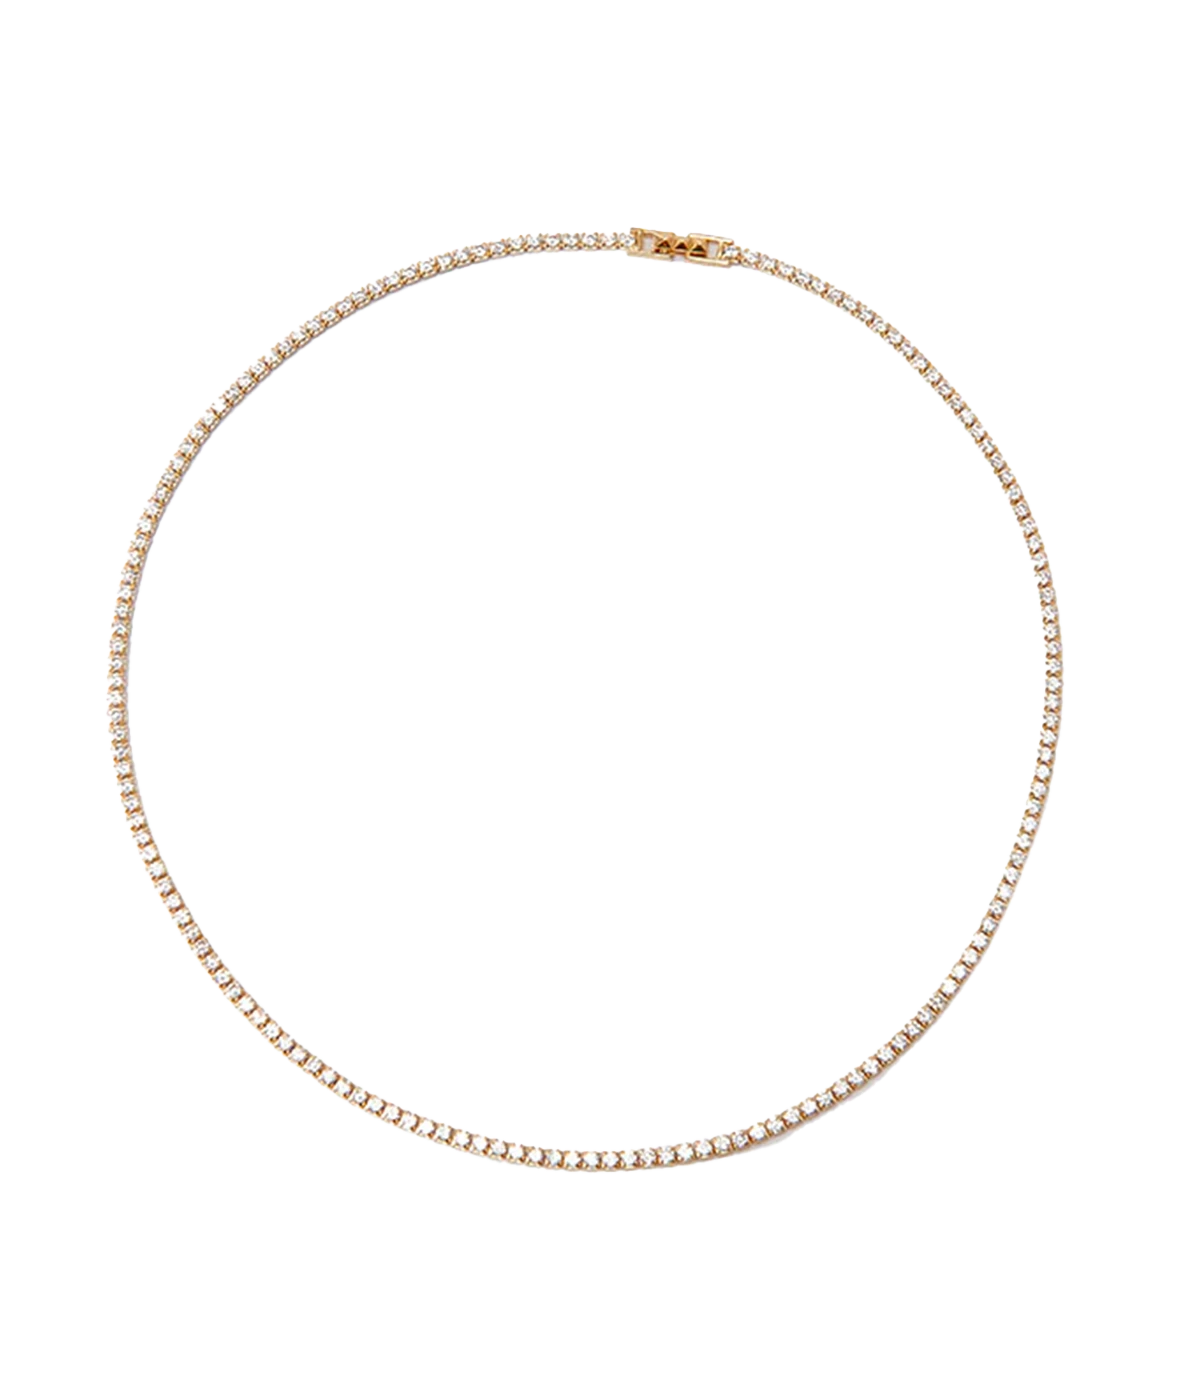 A classic everyday crystal necklace with yellow clasp detailing. Date night, layering piece, comfortable, quiet luxury, effortless, made internationally.